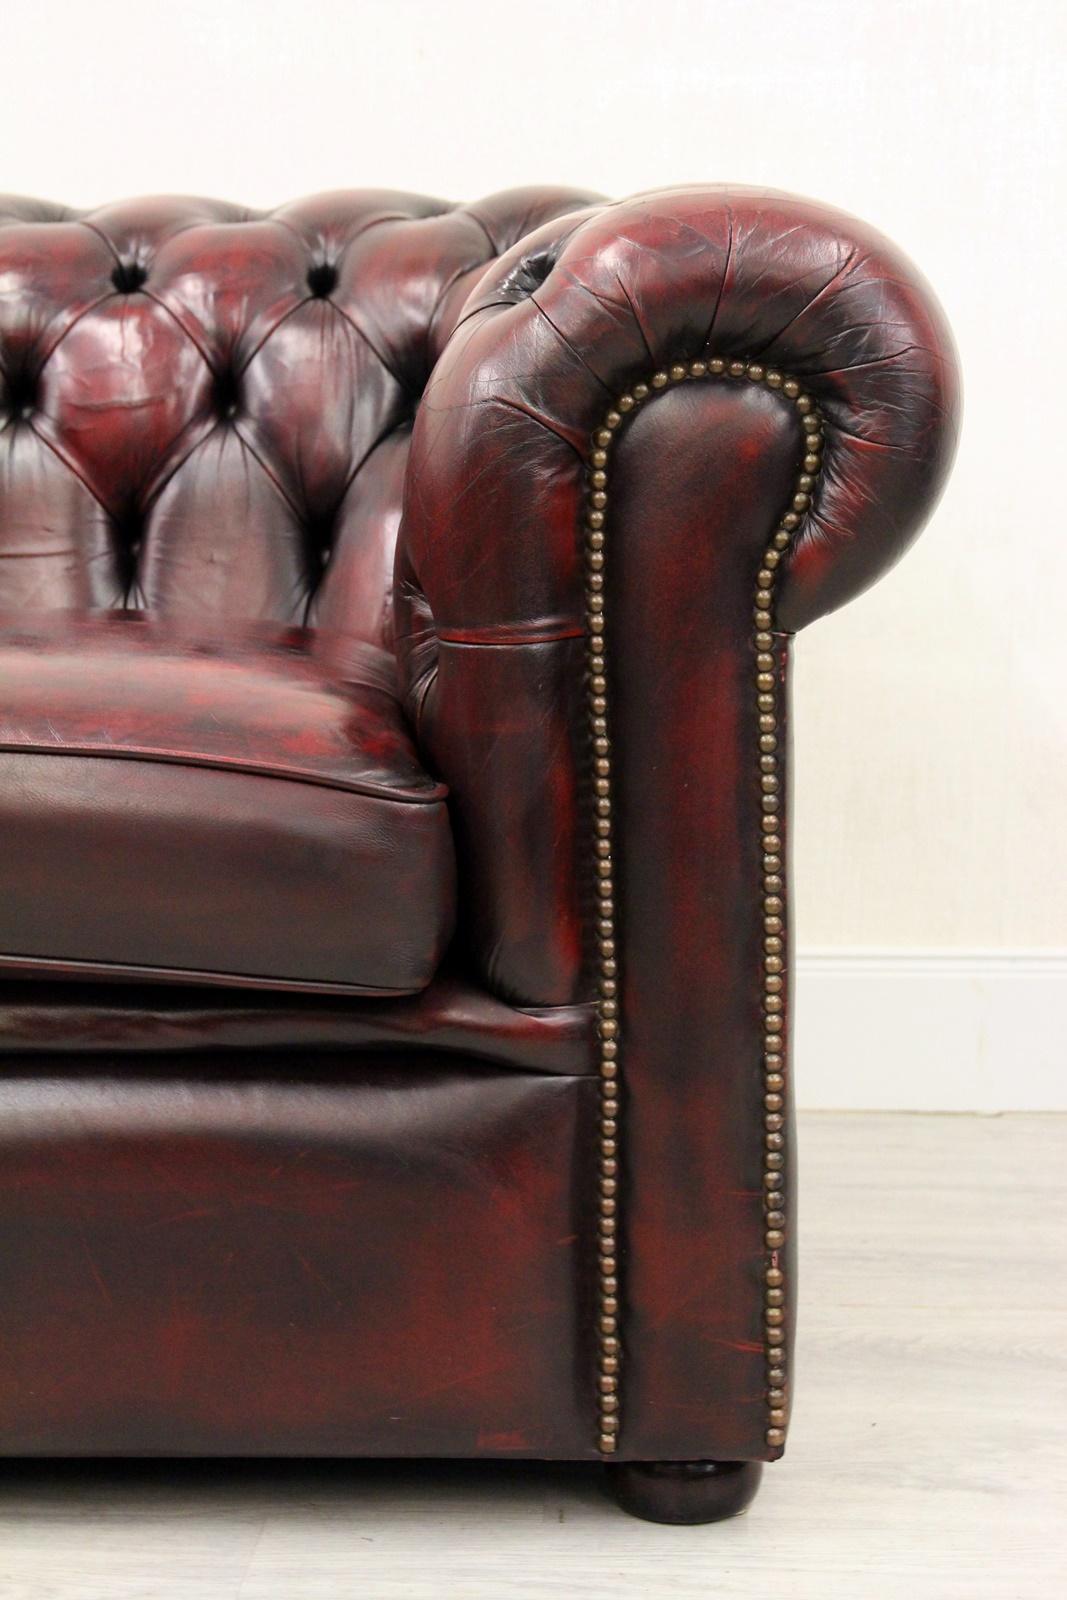 Chesterfield real leather two-seat sofa
in original design.

Condition: The sofa is in good condition (patina)
sofa
Measures: Height x 75cm length x 180cm depth x 90cm
Upholstery is in good condition with beautiful patina (see photos).
Color: